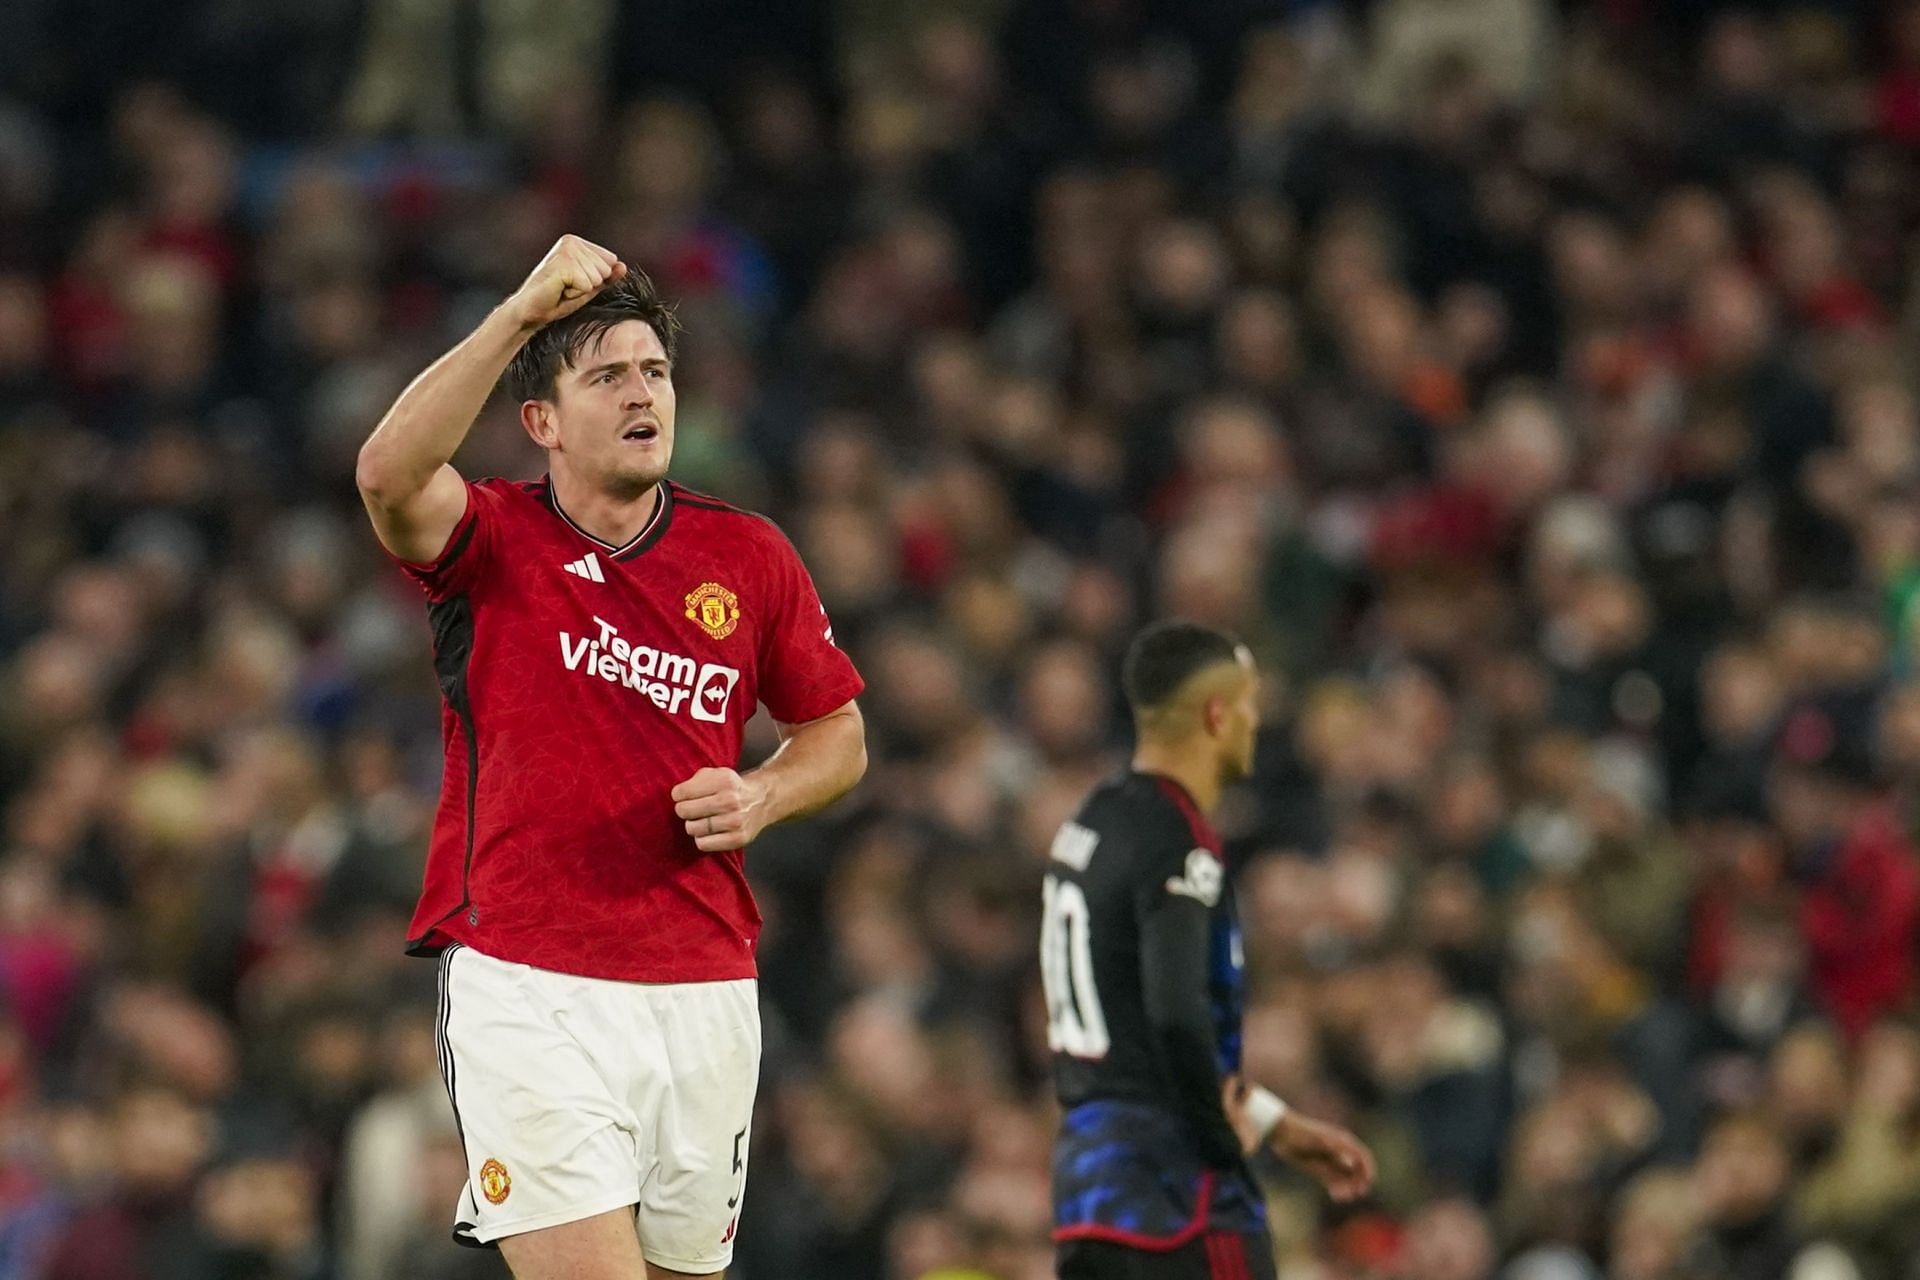 Maguire scored the winning goal on the night.